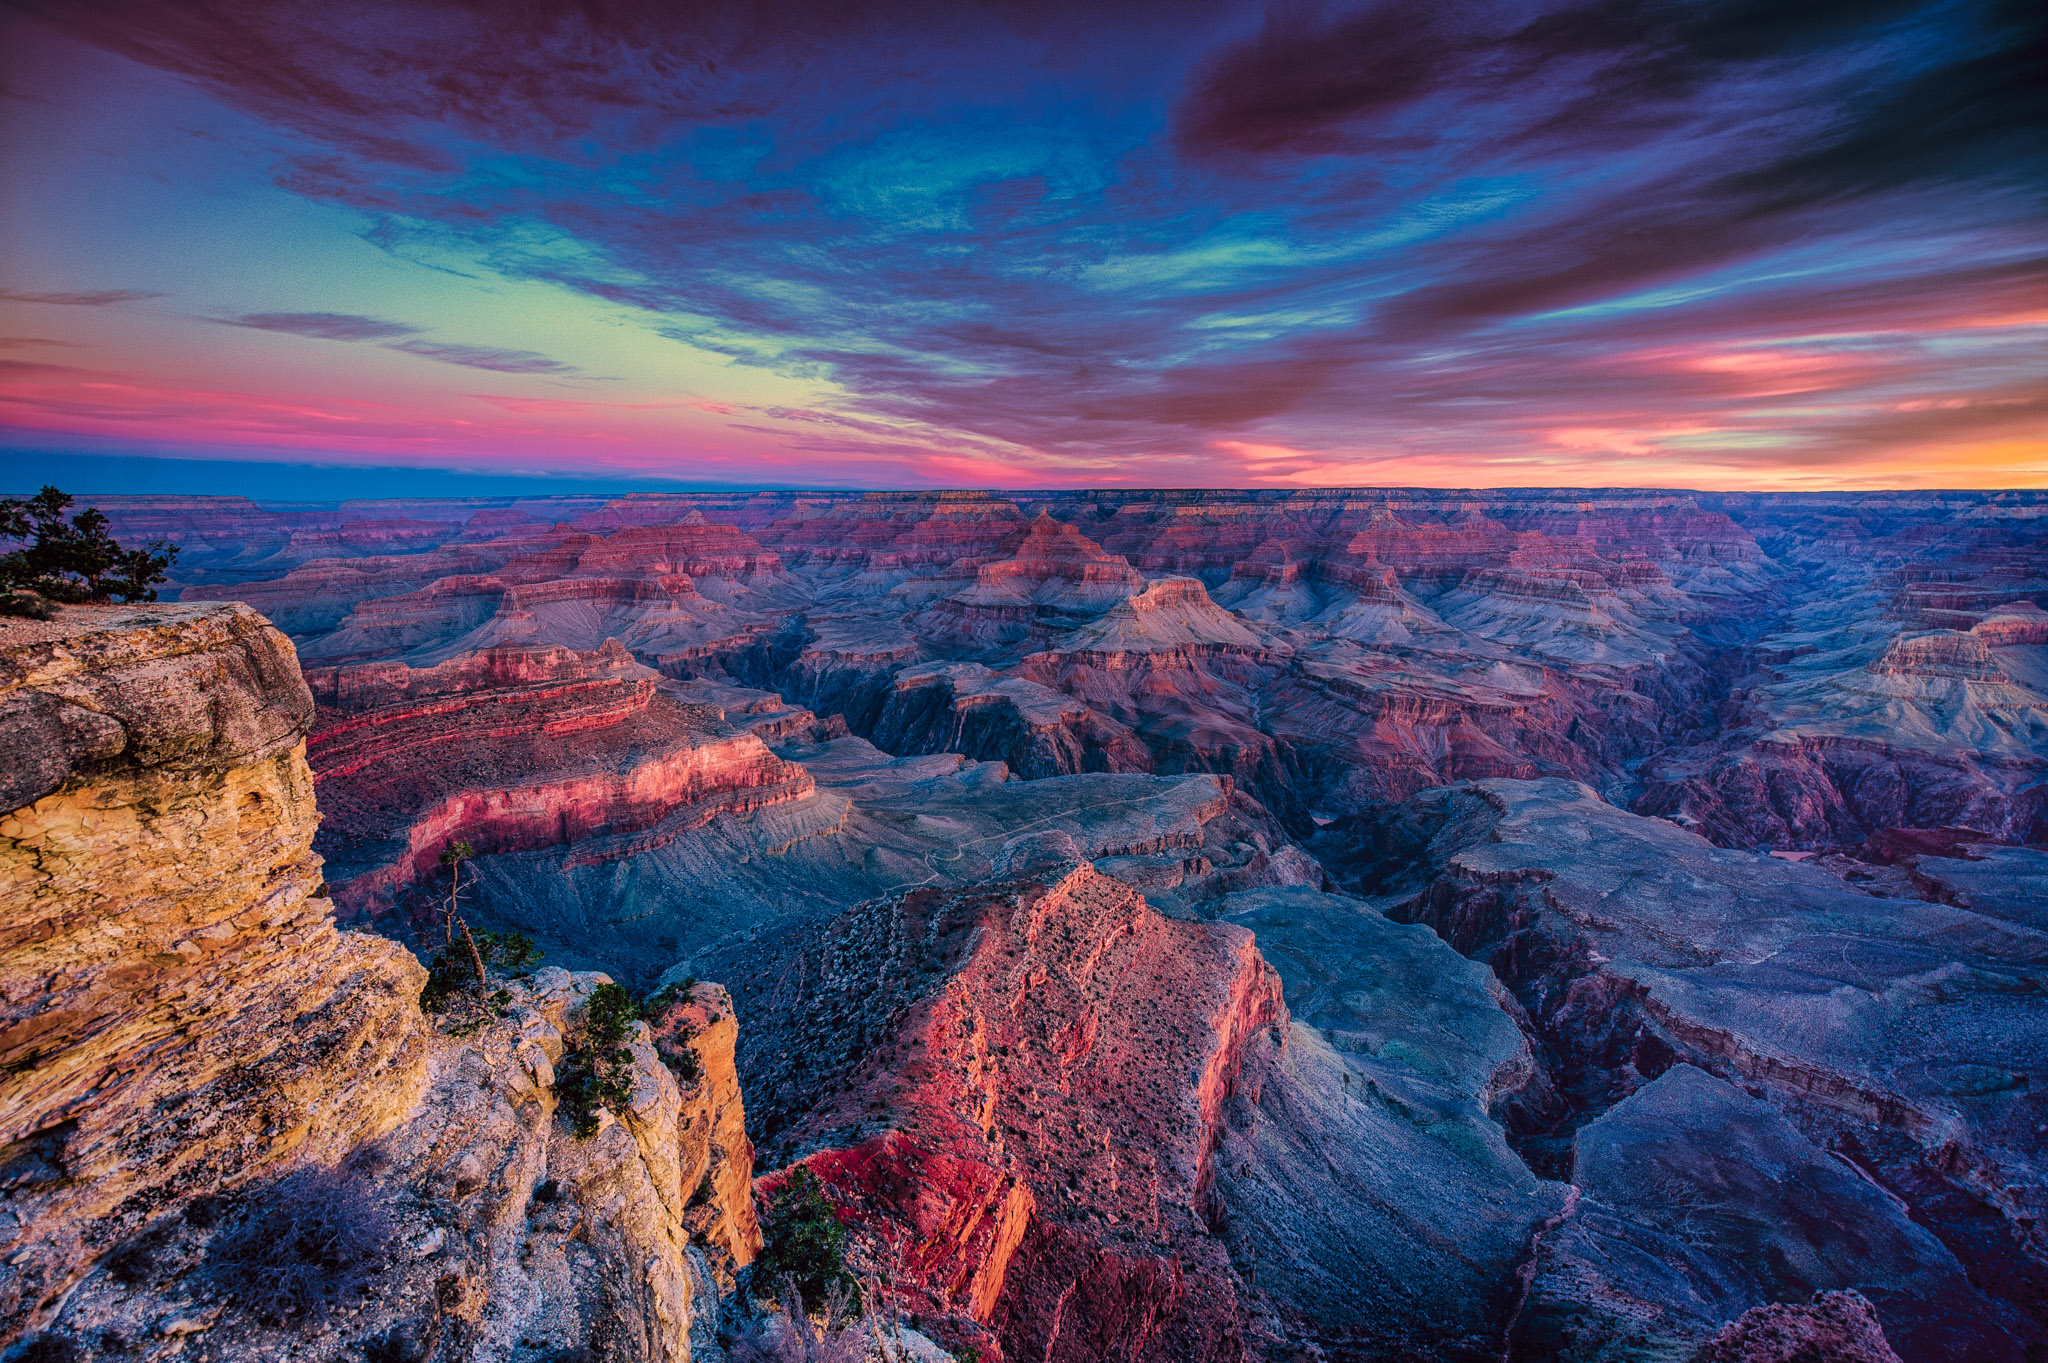 General 2048x1363 nature landscape Grand Canyon valley rocks mountains USA sunset clouds horizon HDR low light